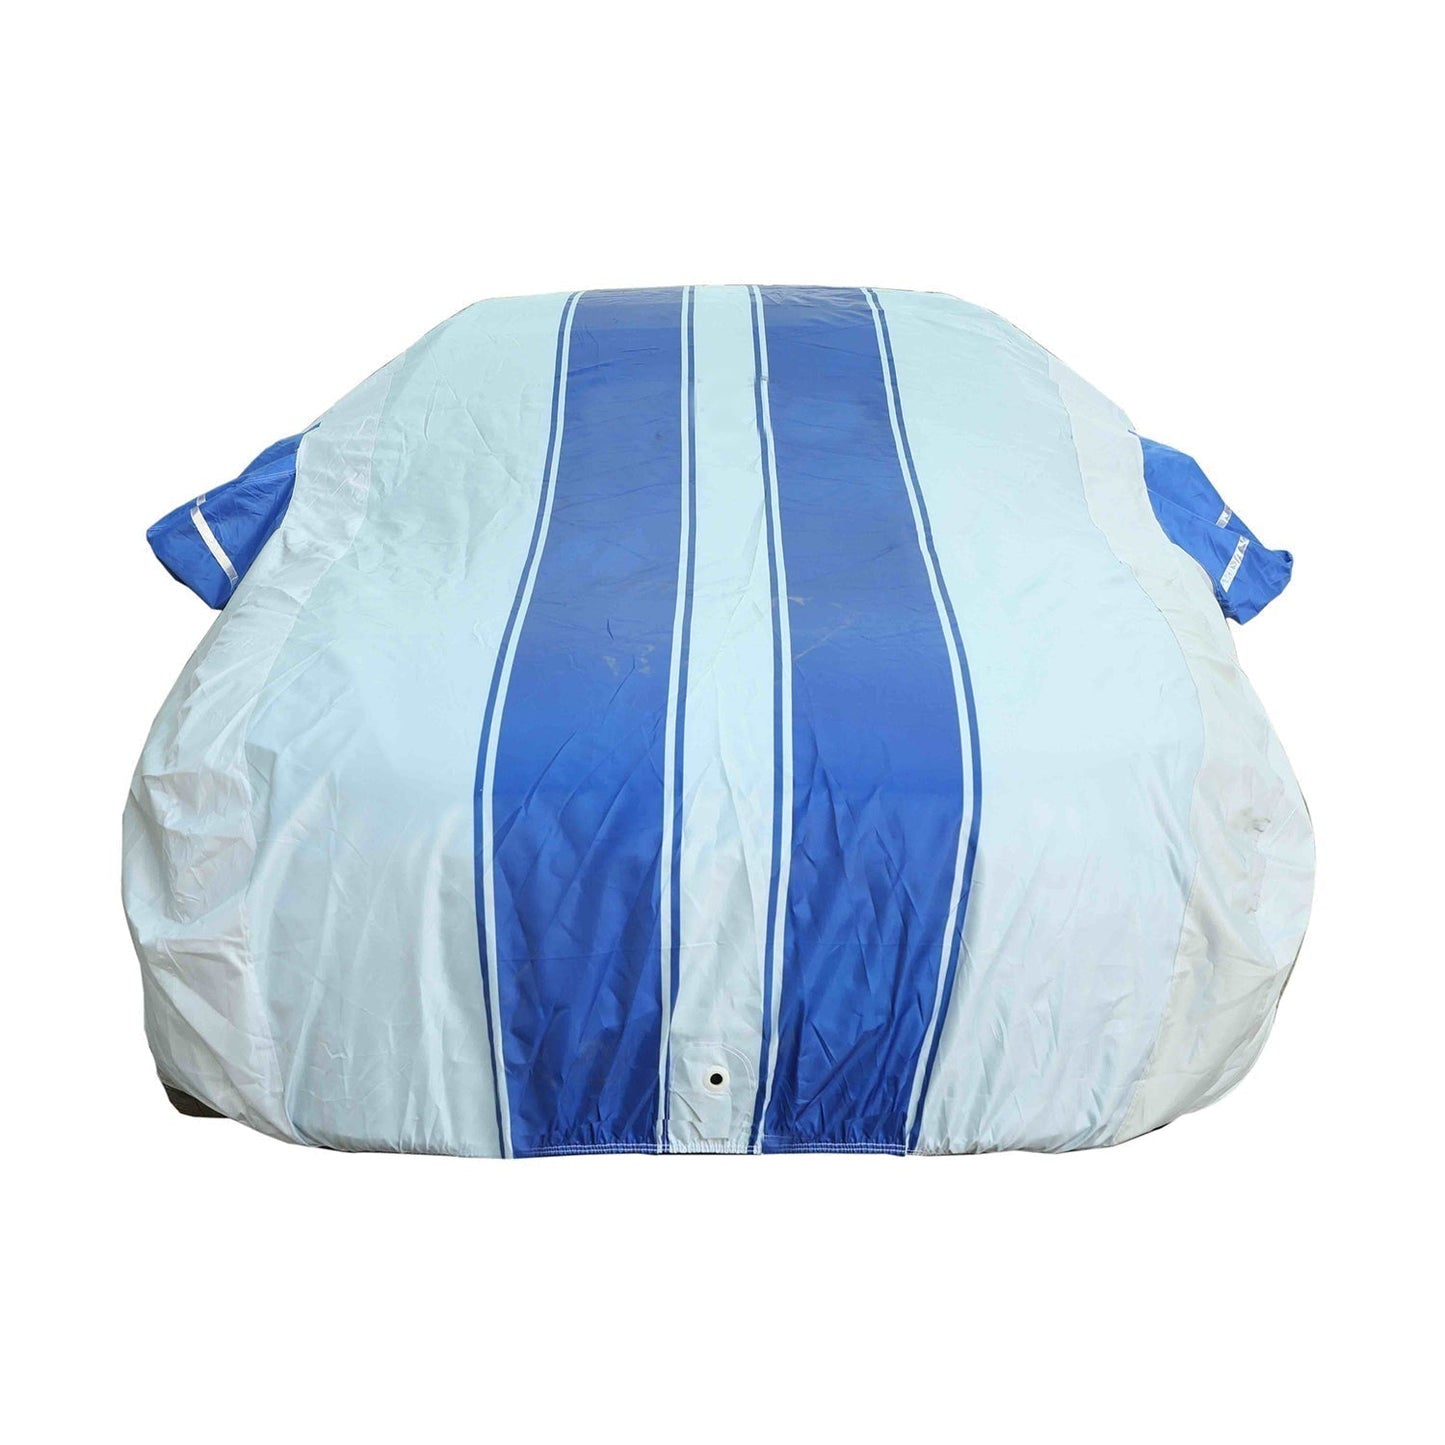 Oshotto 100% Blue dustproof and Water Resistant Car Body Cover with Mirror Pockets For Hyundai Santro Xing Old